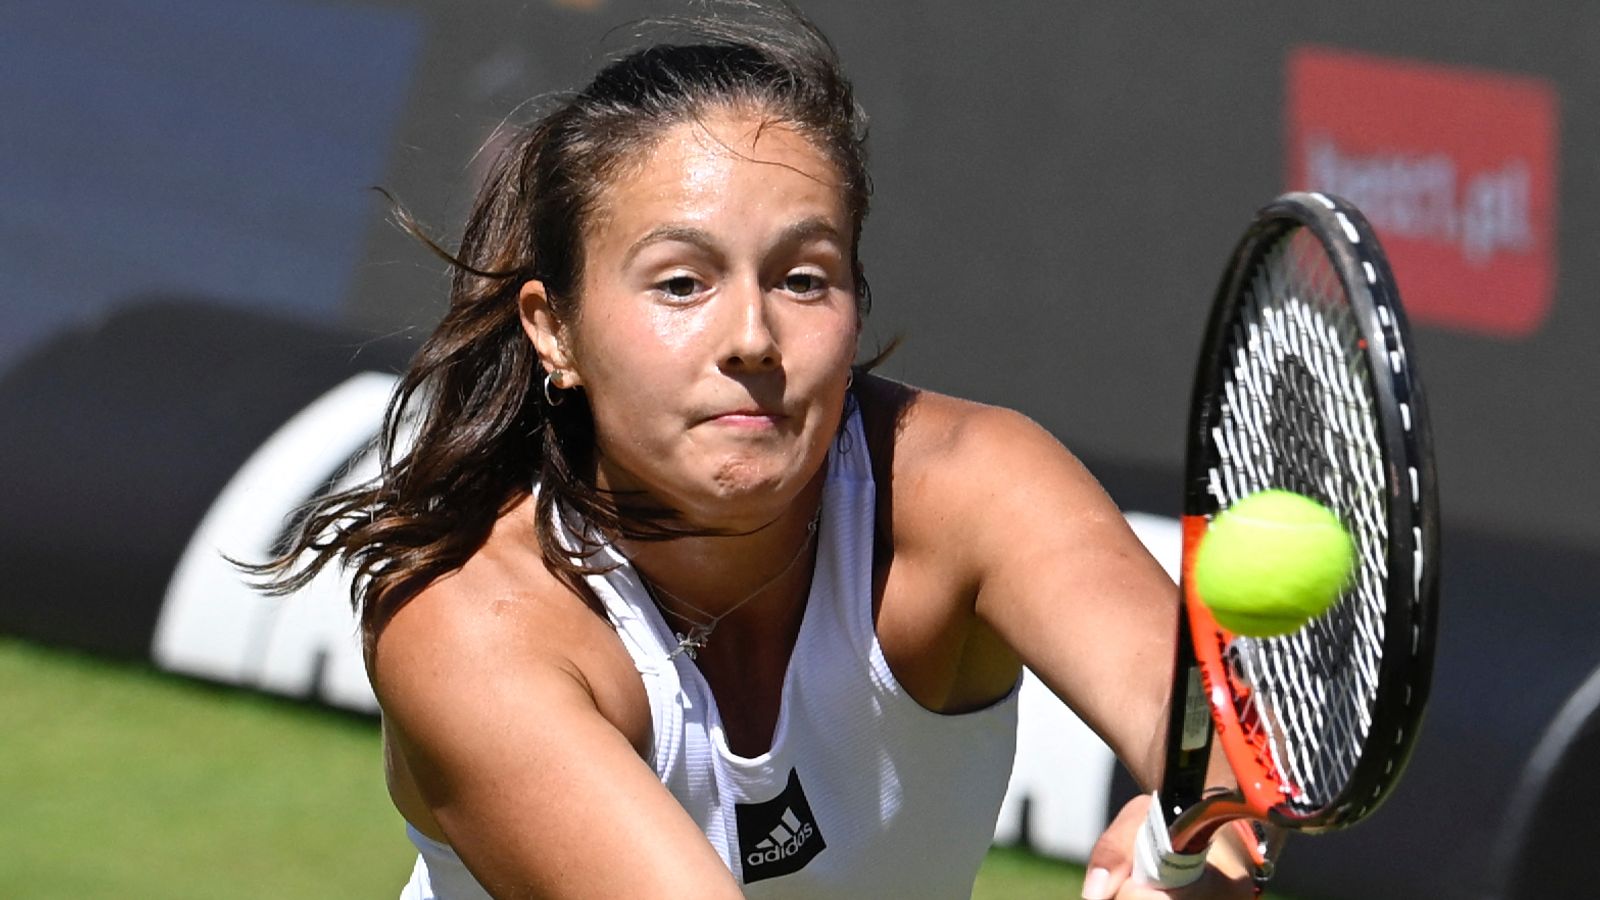 Daria Kasatkina criticises Russian attitudes to homosexuality after coming out